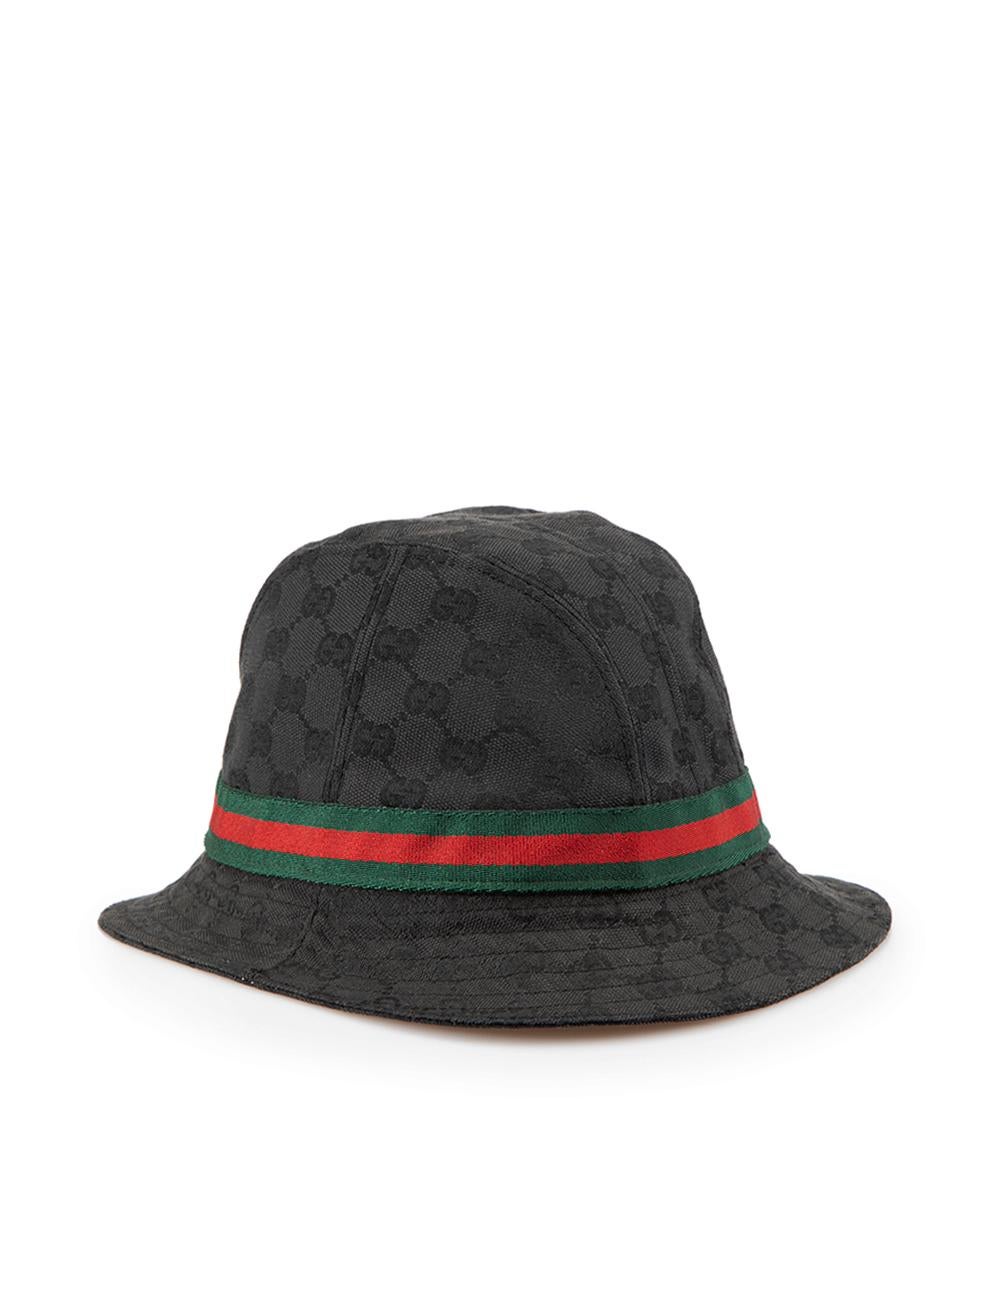 CONDITION is Very good. Minimal wear to hat is evident. Minimal wear to the leather brand label with scuffs on this used Gucci designer resale item.



Details


Black

Canvas

Bucket hat

GG supreme pattern

Green and red web band





Made in